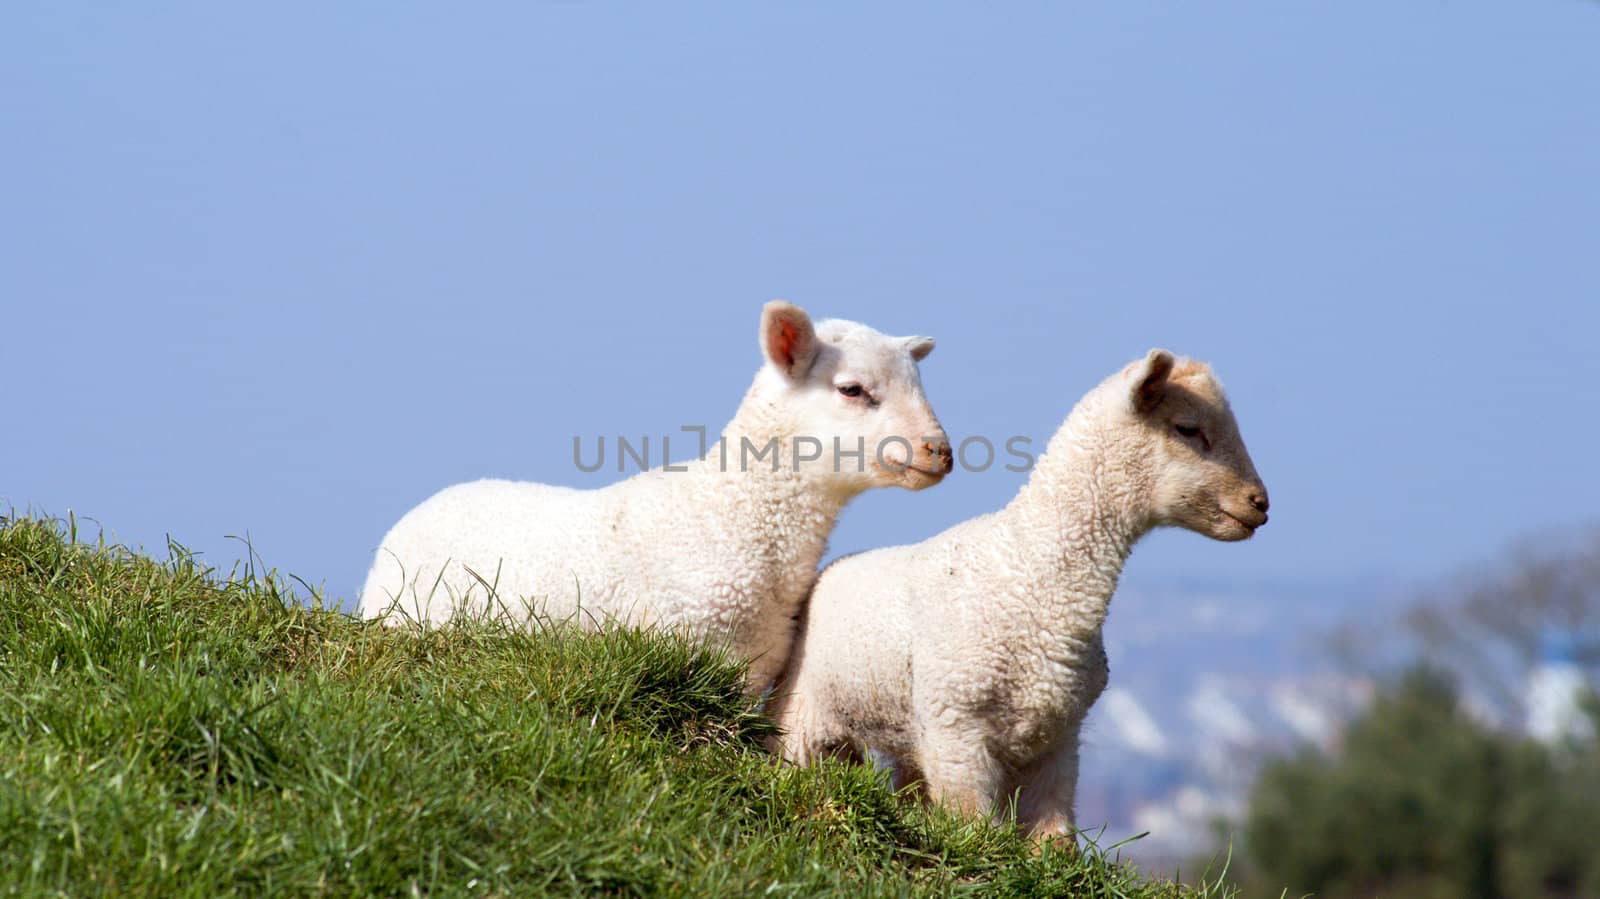 Young Lamb On Green Grass,Cornwall, UK by merc67